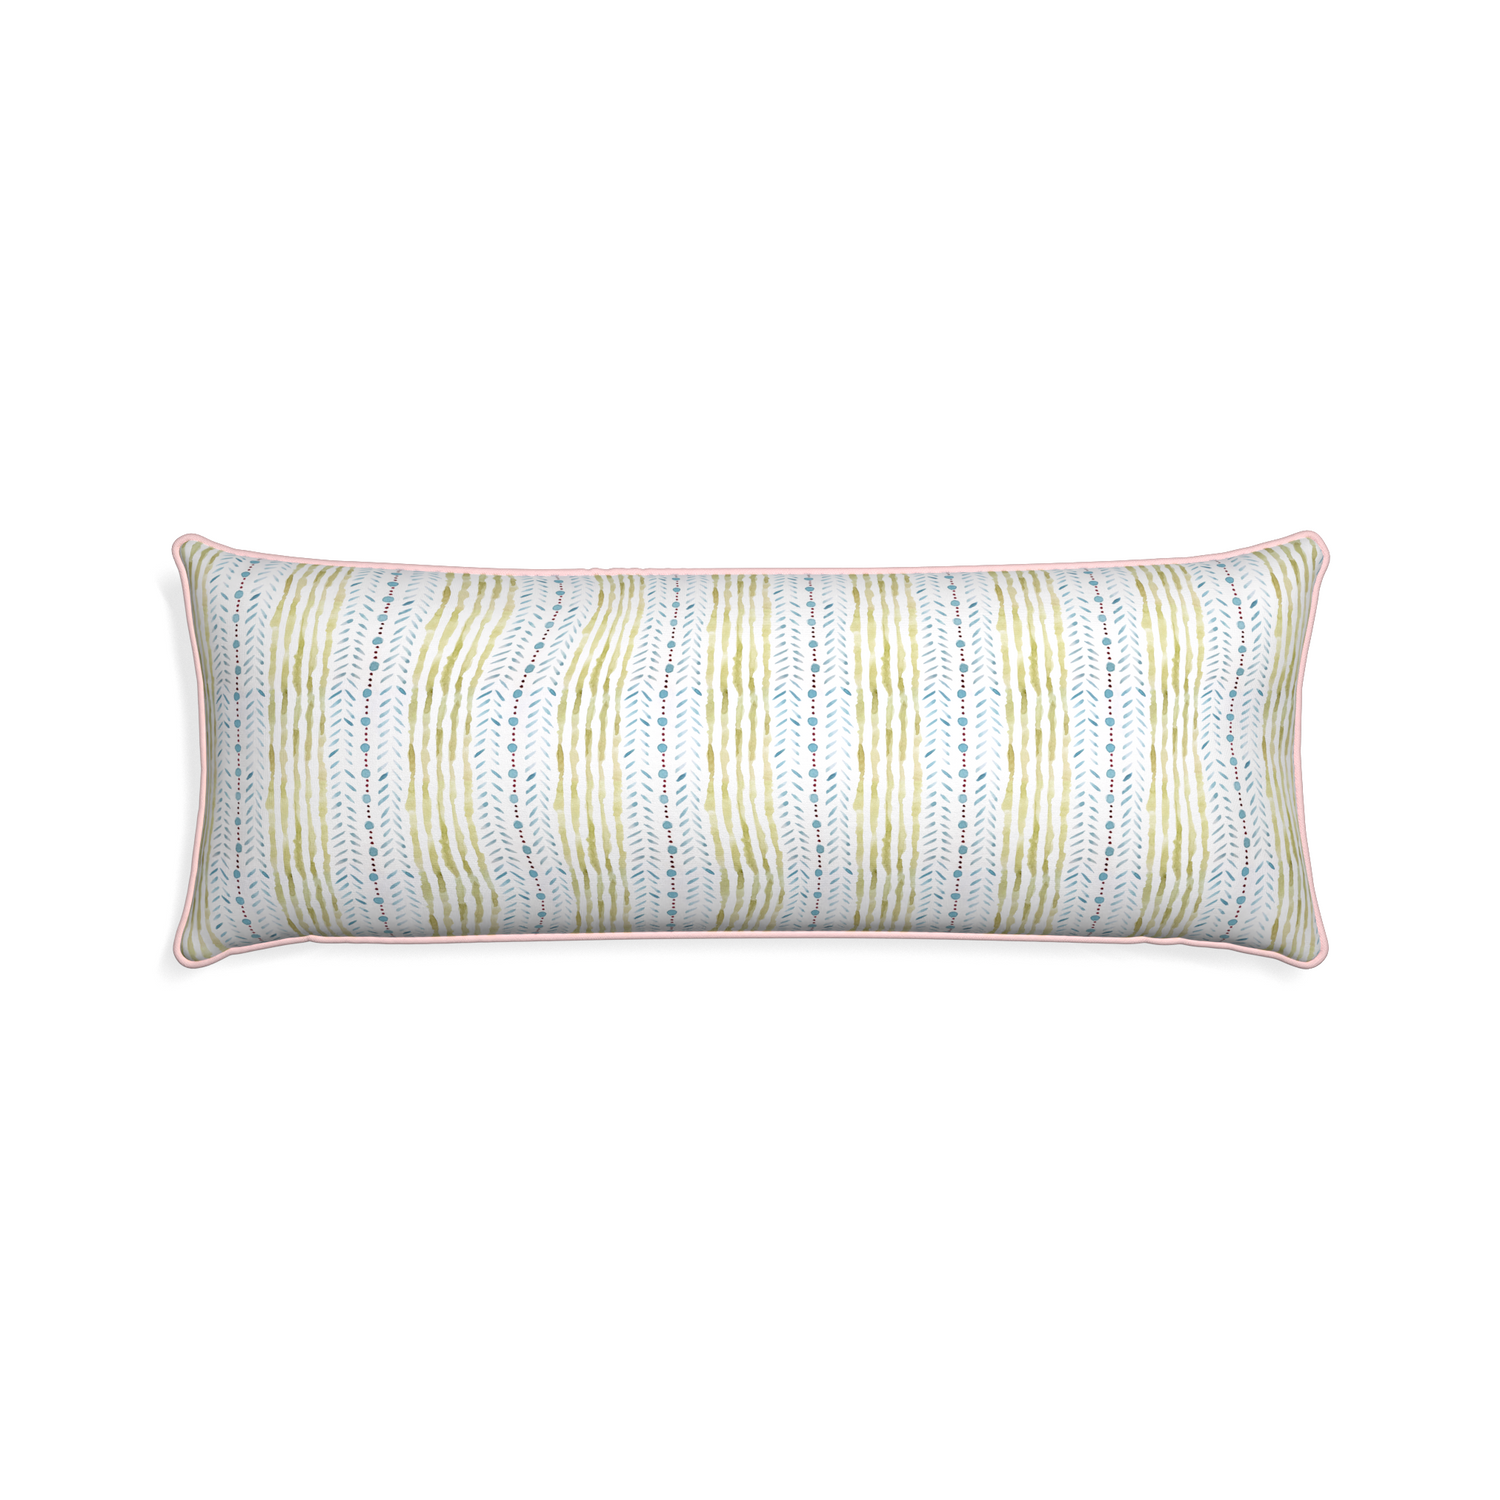 Xl-lumbar julia custom blue & green stripedpillow with petal piping on white background